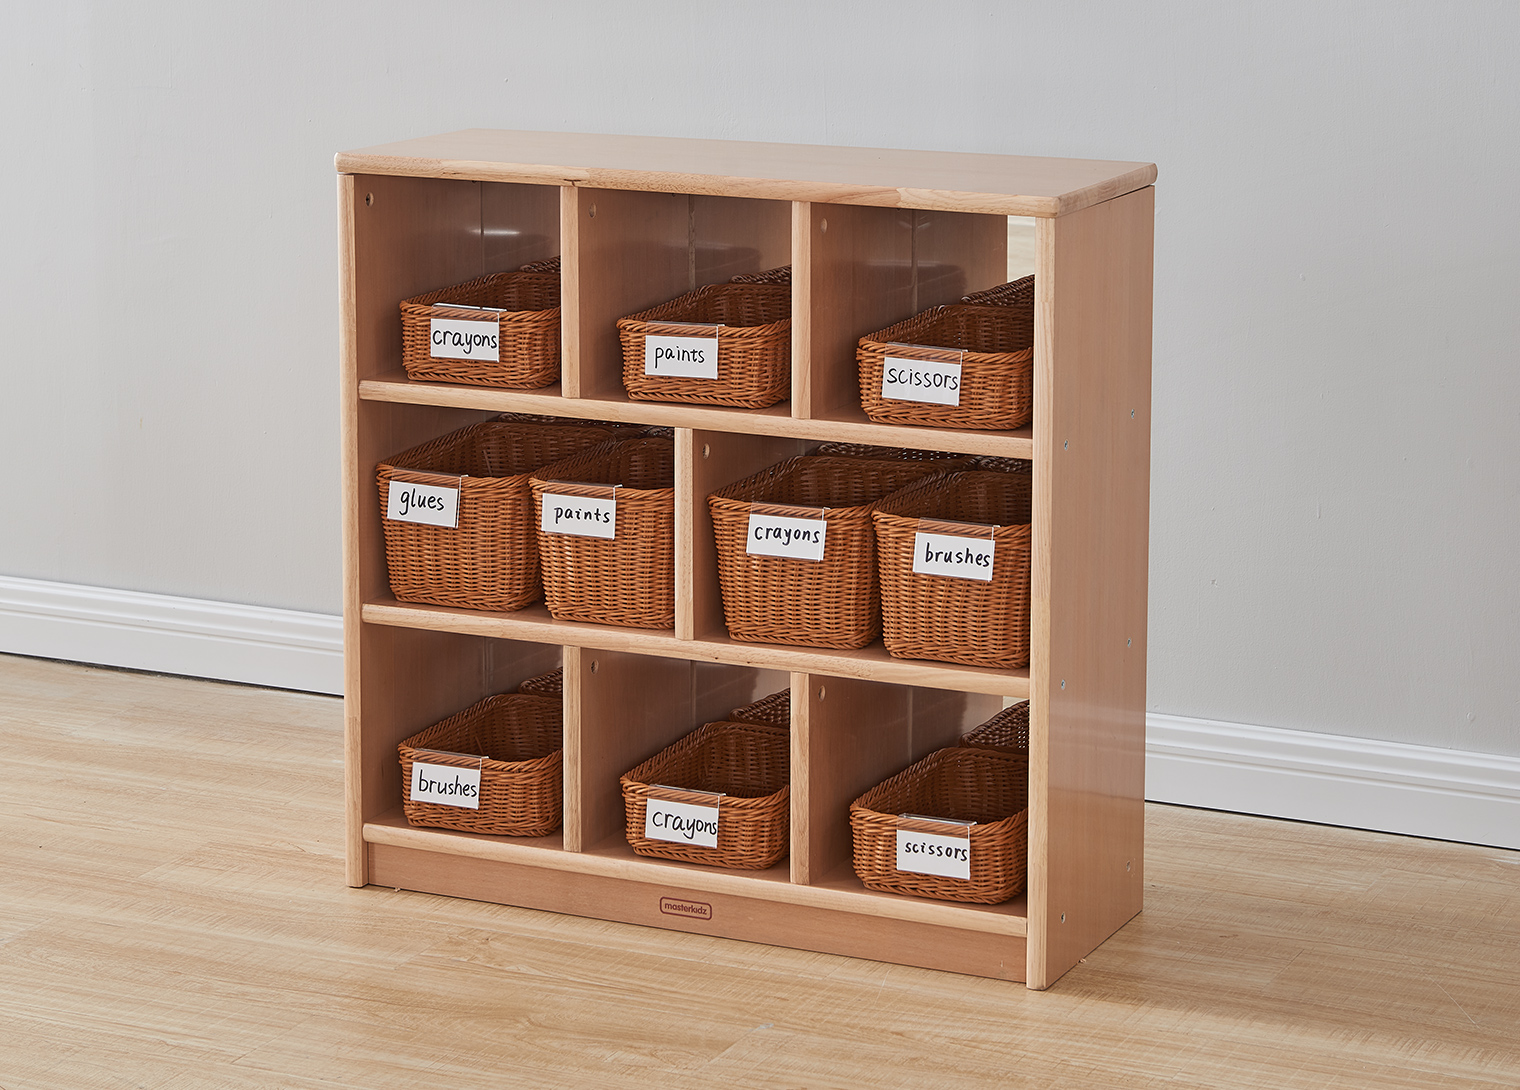 Forest School - 789H x 810L Wooden  8-Compartment Shelving Unit - Anti-Scratch Acrylic Mirror Back